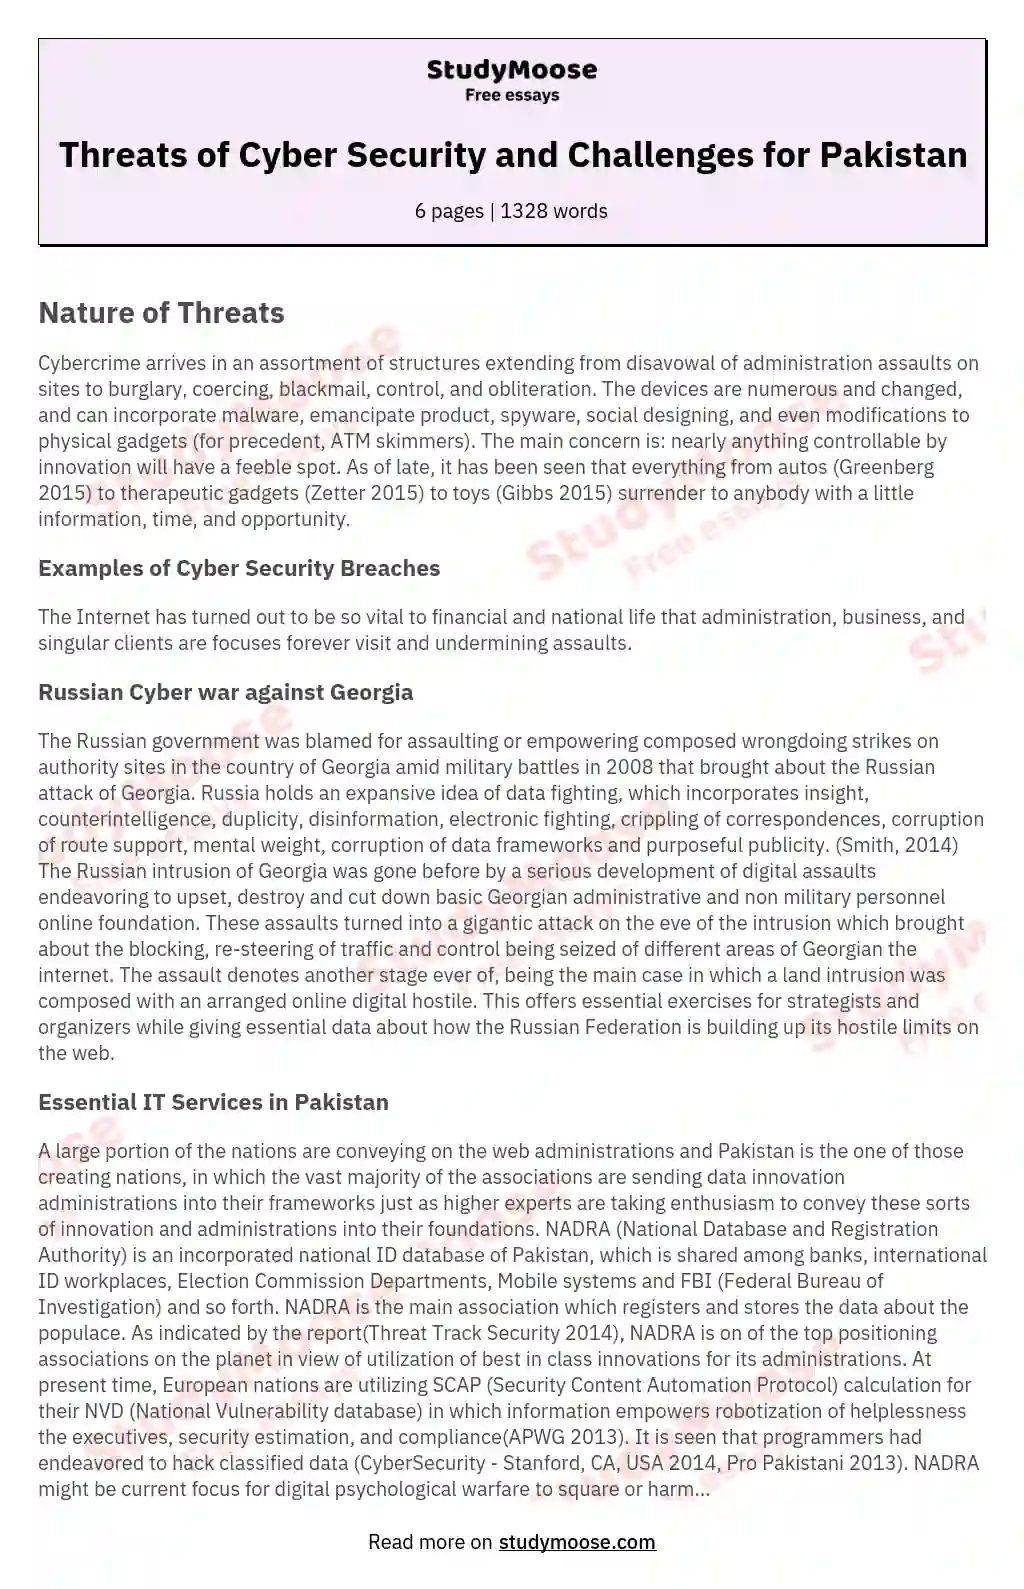 Threats of Cyber Security and Challenges for Pakistan